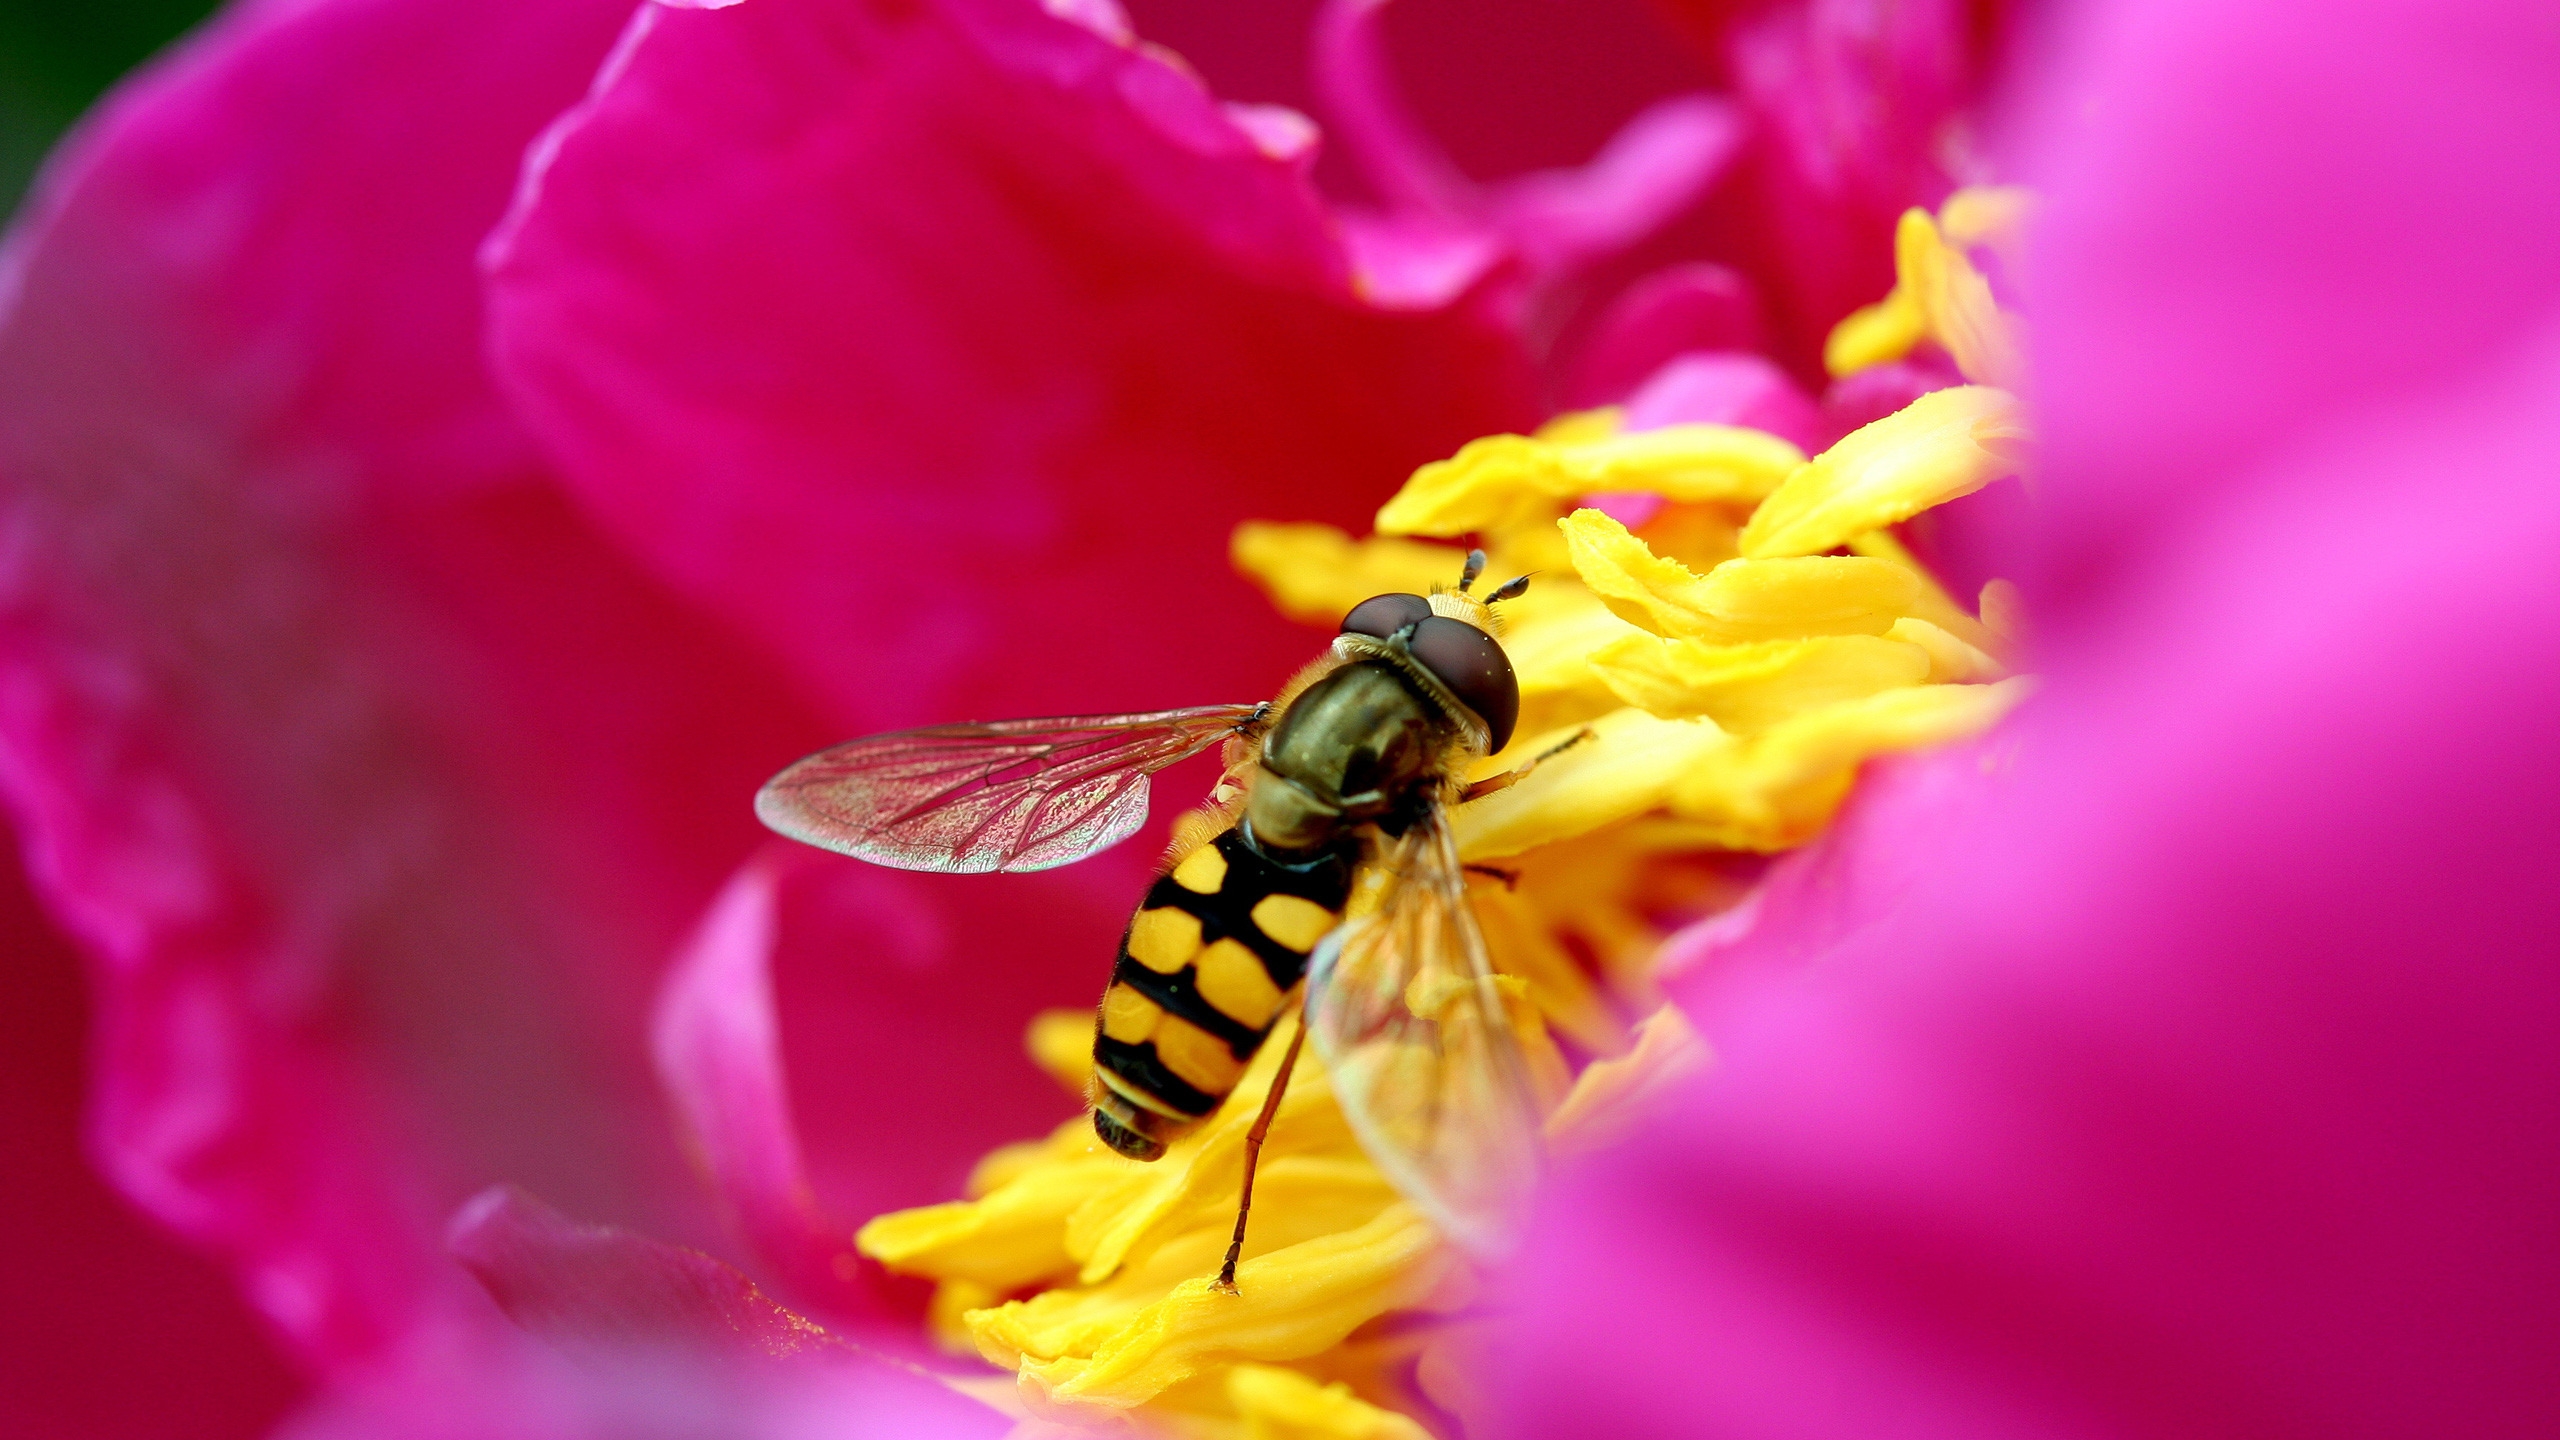 Syrphid Fly for 2560x1440 HDTV resolution